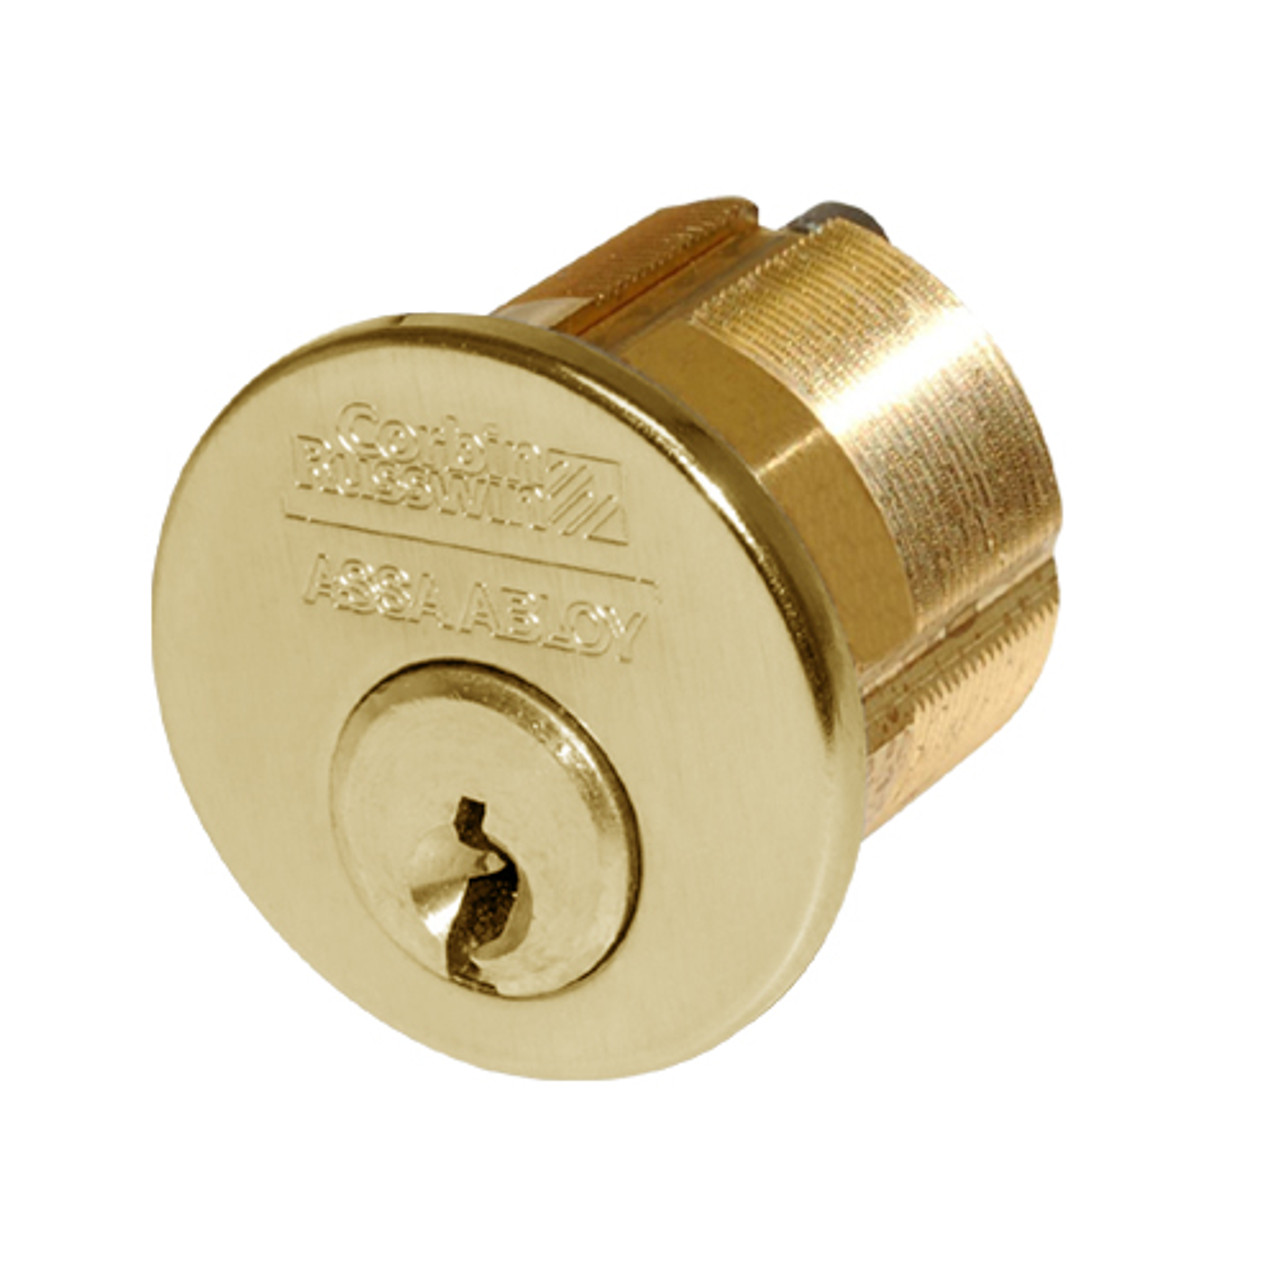 CR1000-200-A01-6-D2-605 Corbin Conventional Mortise Cylinder for Mortise Lock and DL3000 Deadlocks with Cloverleaf Cam in Bright Brass Finish